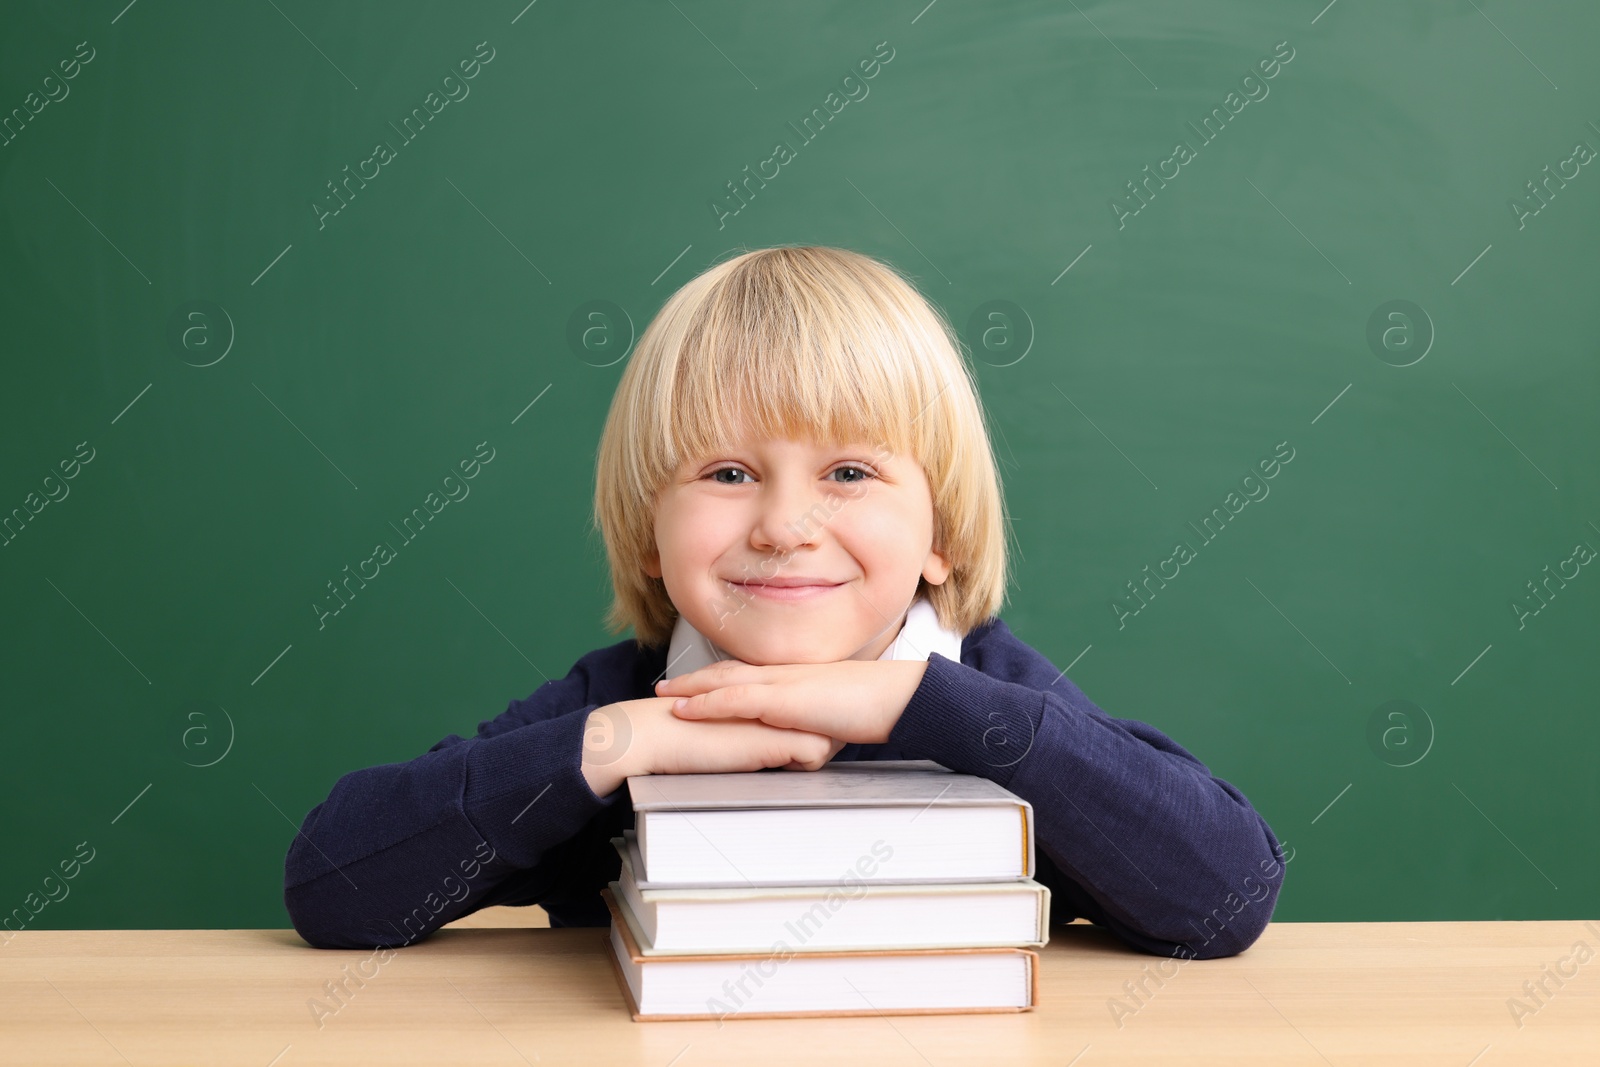 Photo of Happy little school child sitting at desk with books near chalkboard